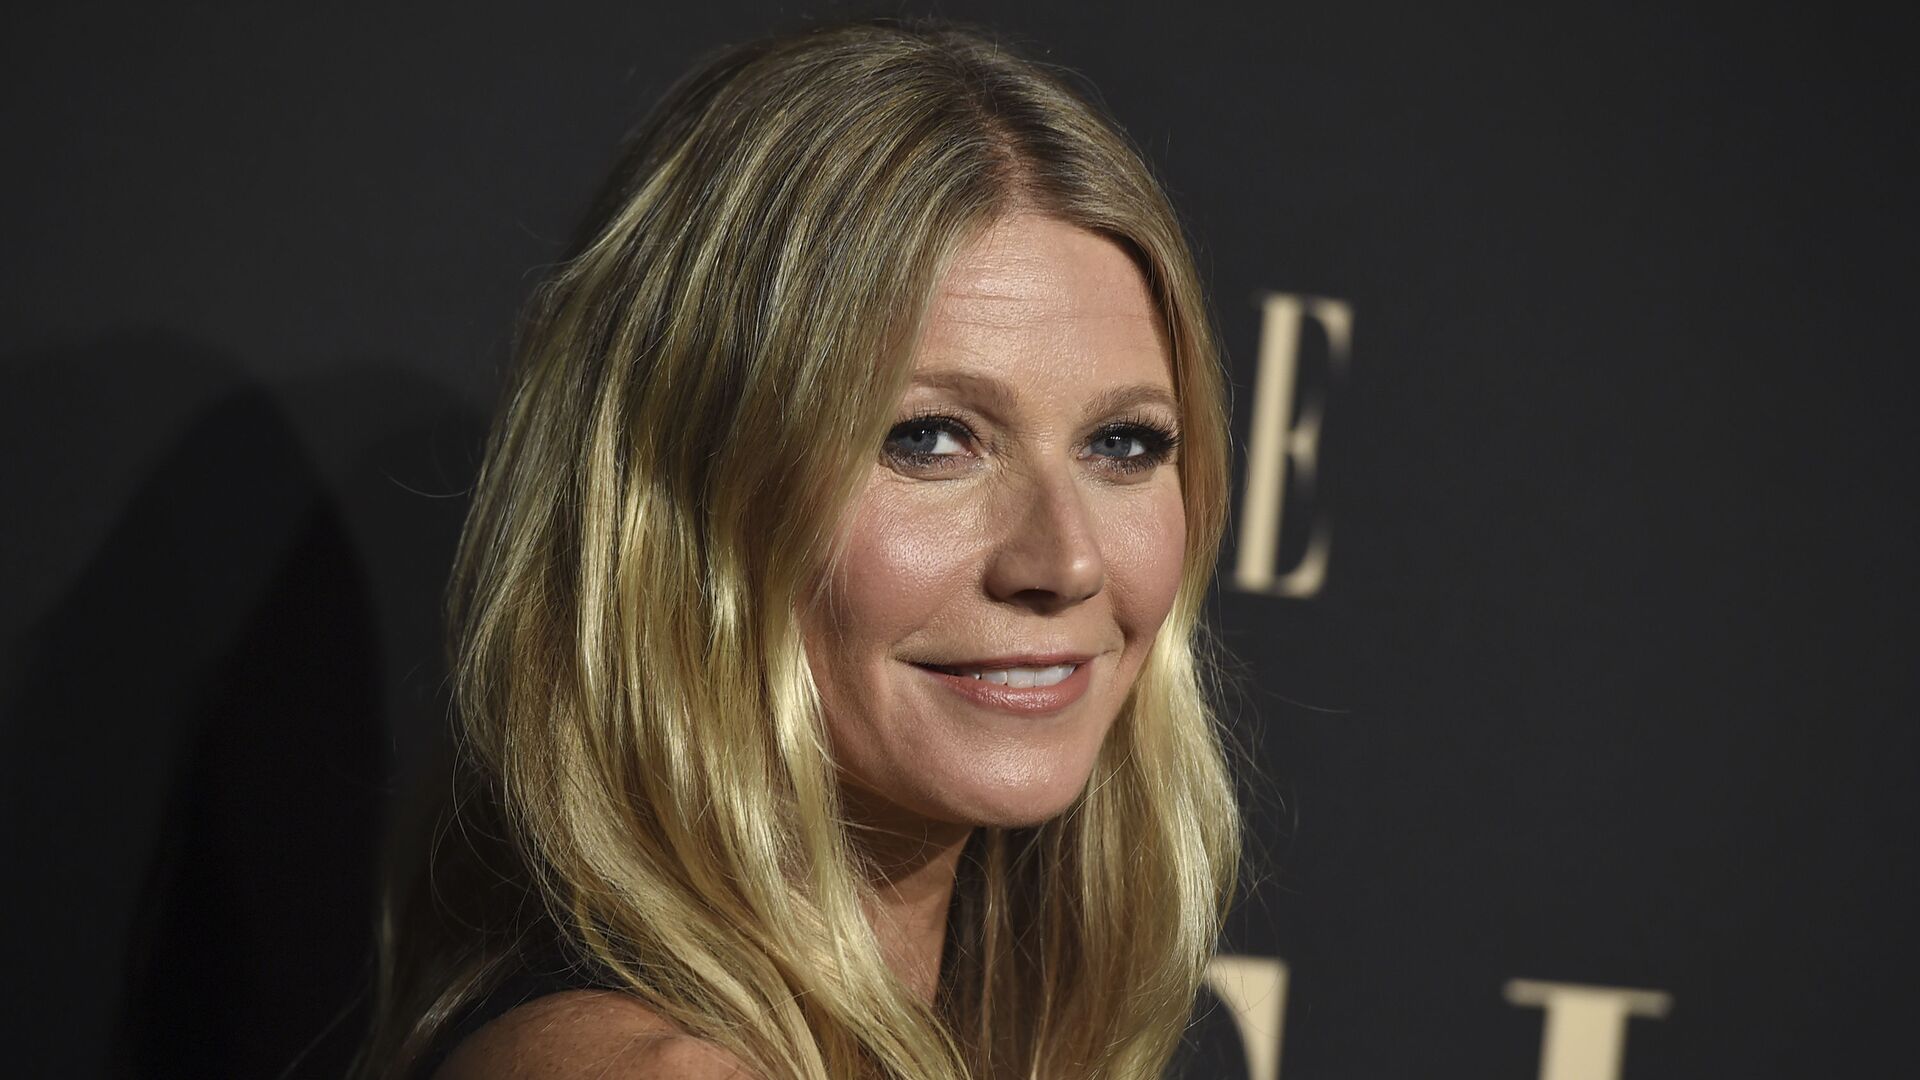 Gwyneth Paltrow arrives at the 26th annual ELLE Women in Hollywood Celebration at the Four Seasons Hotel on Monday, Oct. 14, 2019, in Los Angeles. - Sputnik International, 1920, 22.01.2022